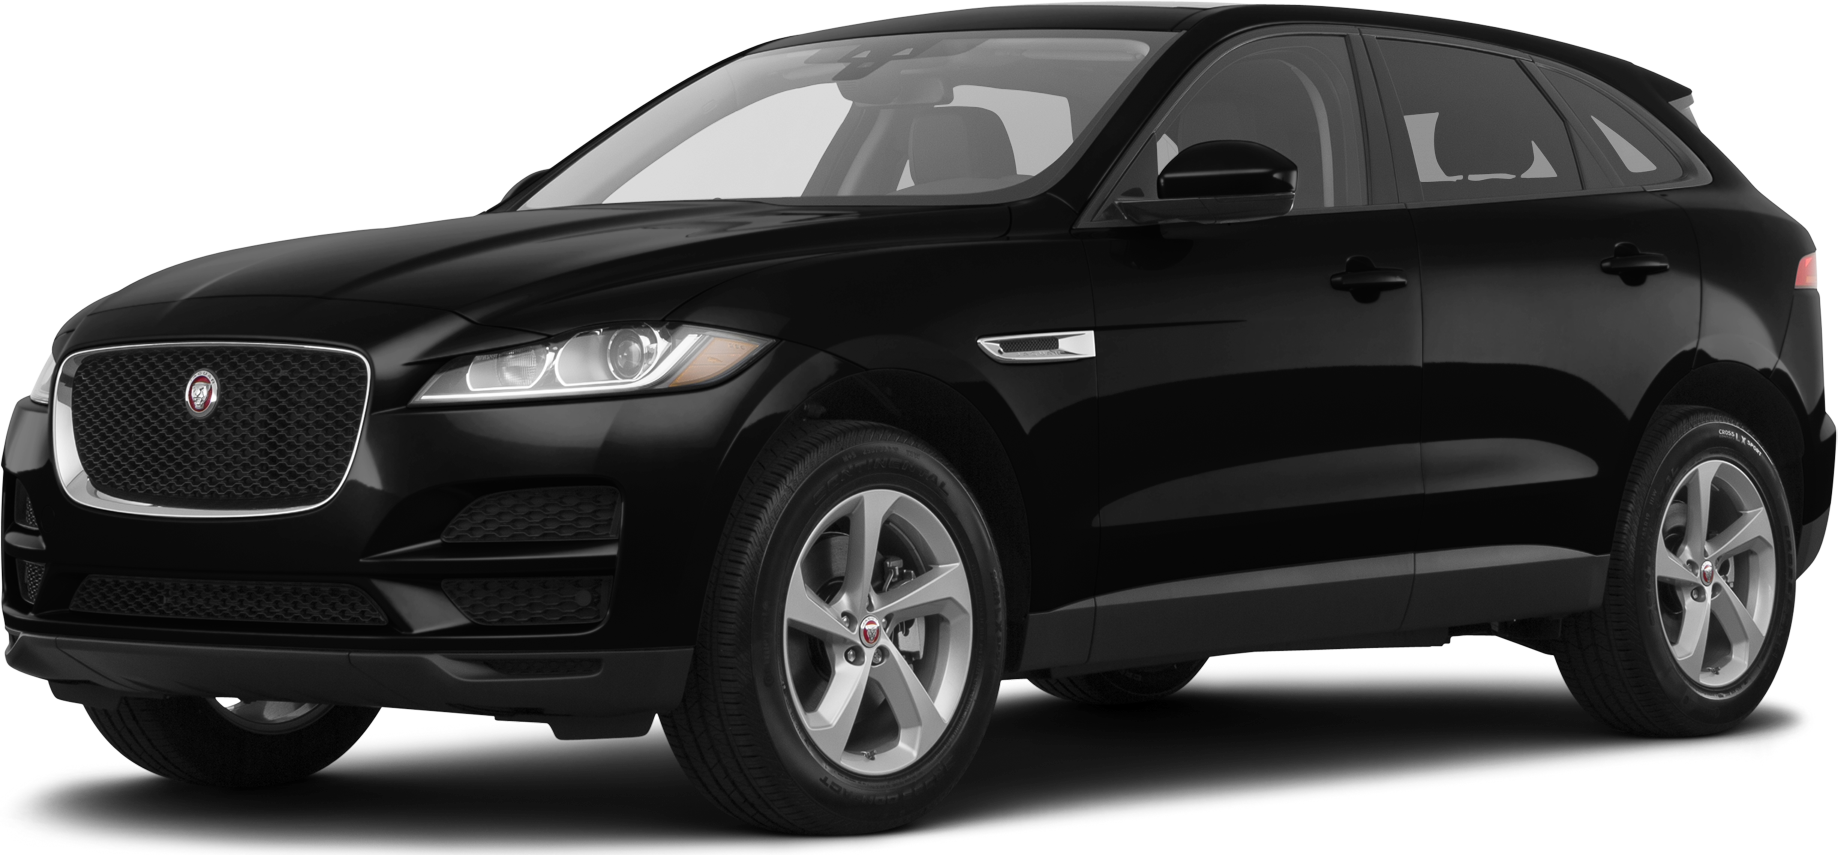 Used 2017 Jaguar F Pace Values Cars For Sale Kelley Blue Book